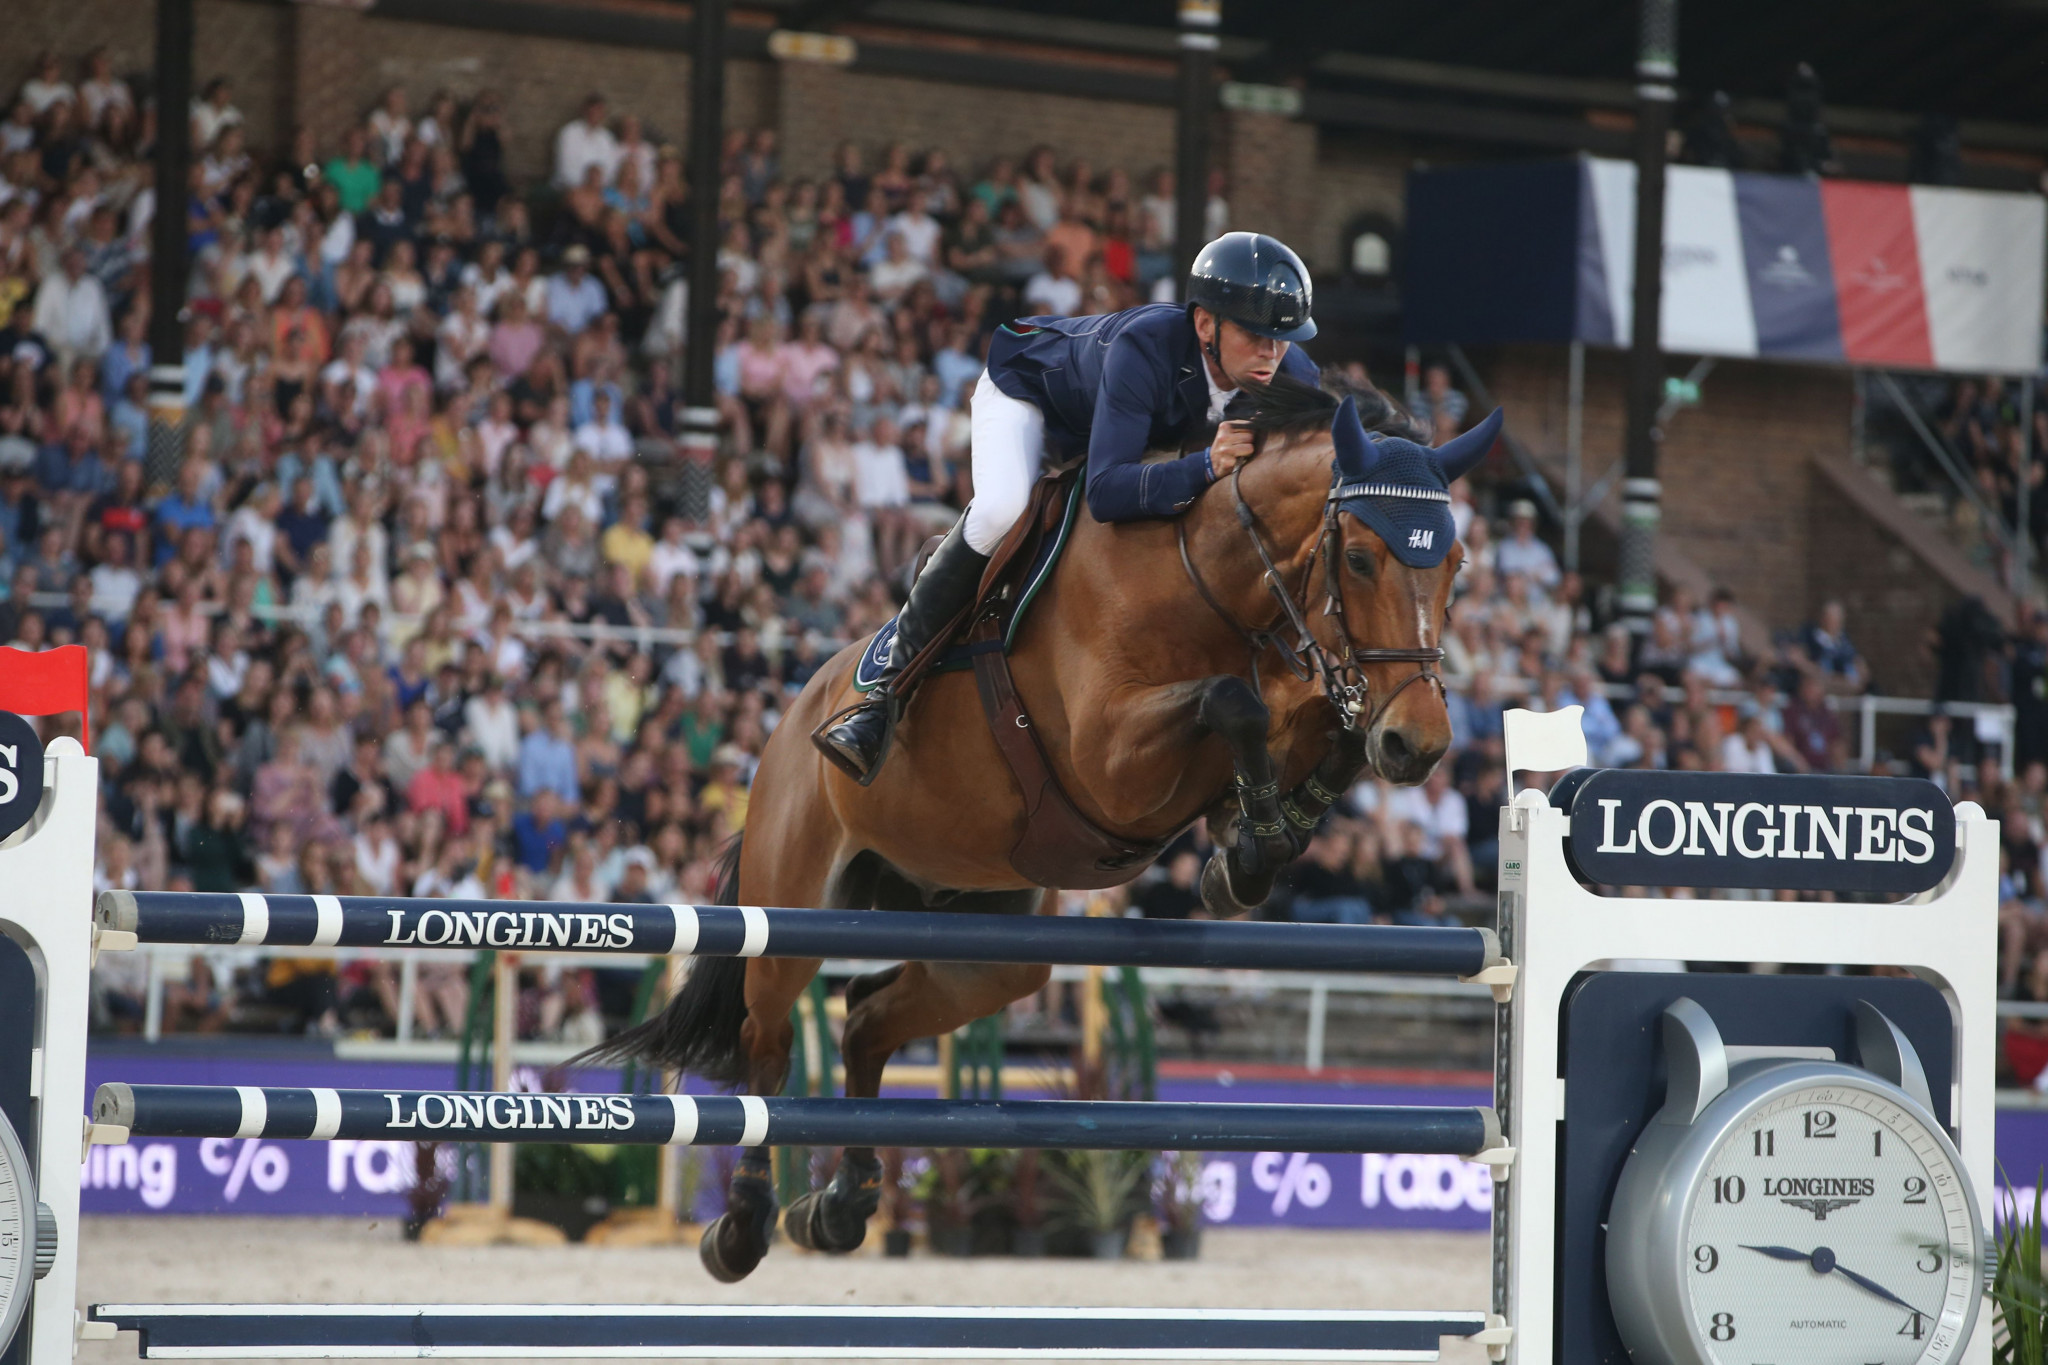 Sweden secure comfortable win at FEI Jumping Nations Cup in Hickstead